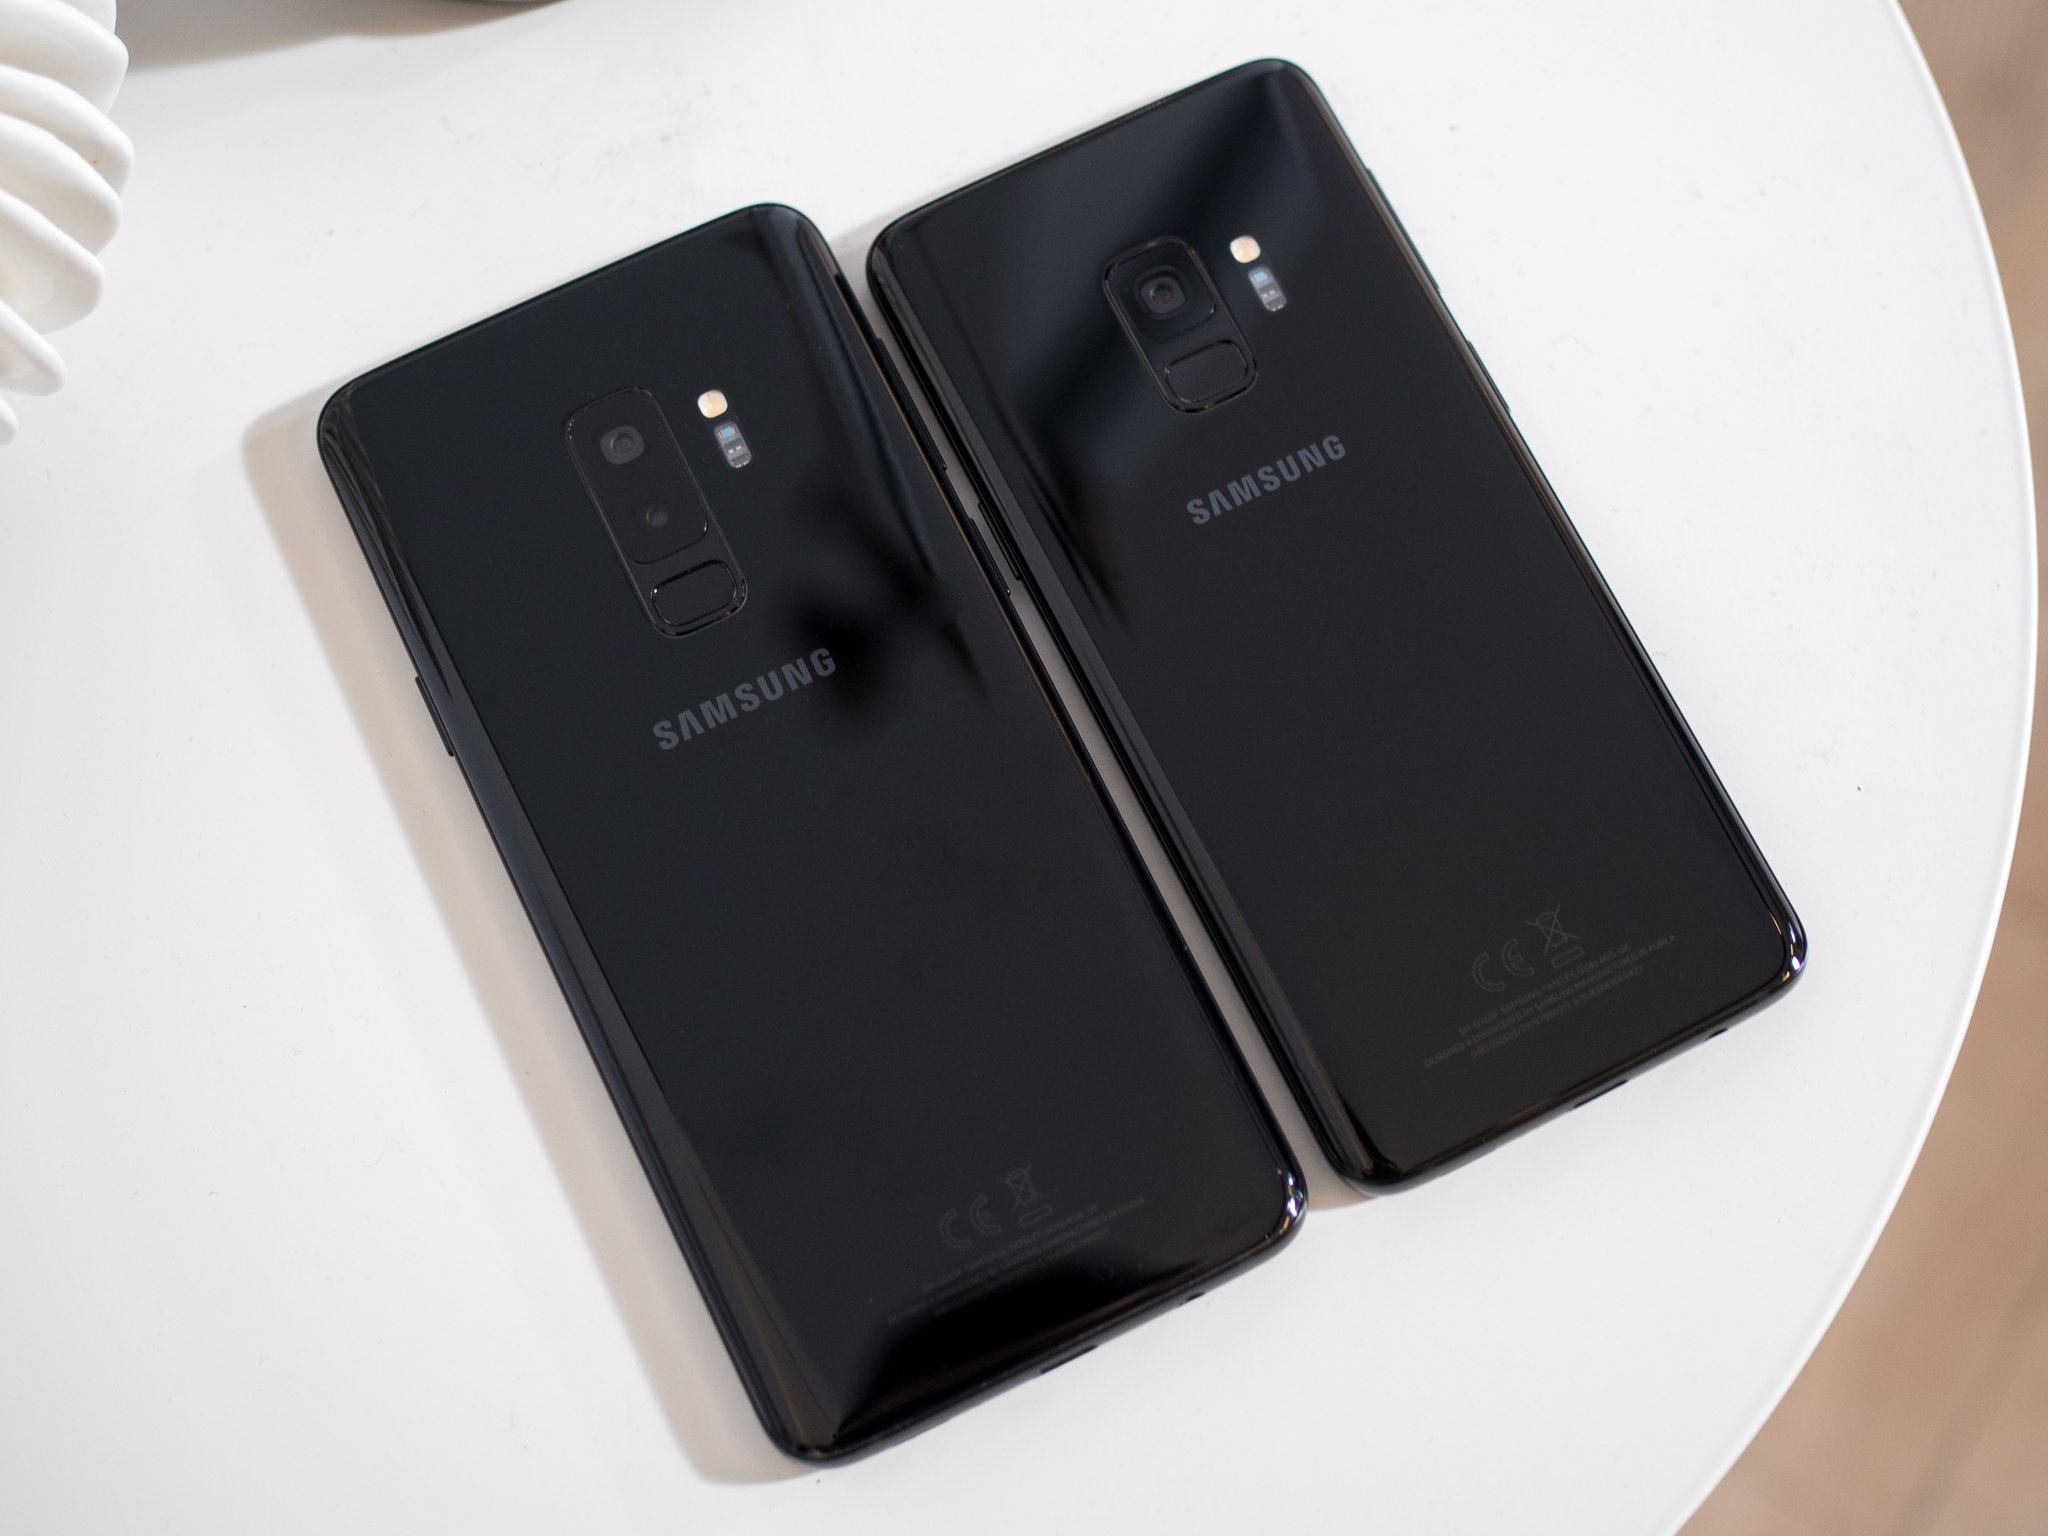 S9 vs Galaxy S9+: Which is VR? | Android Central